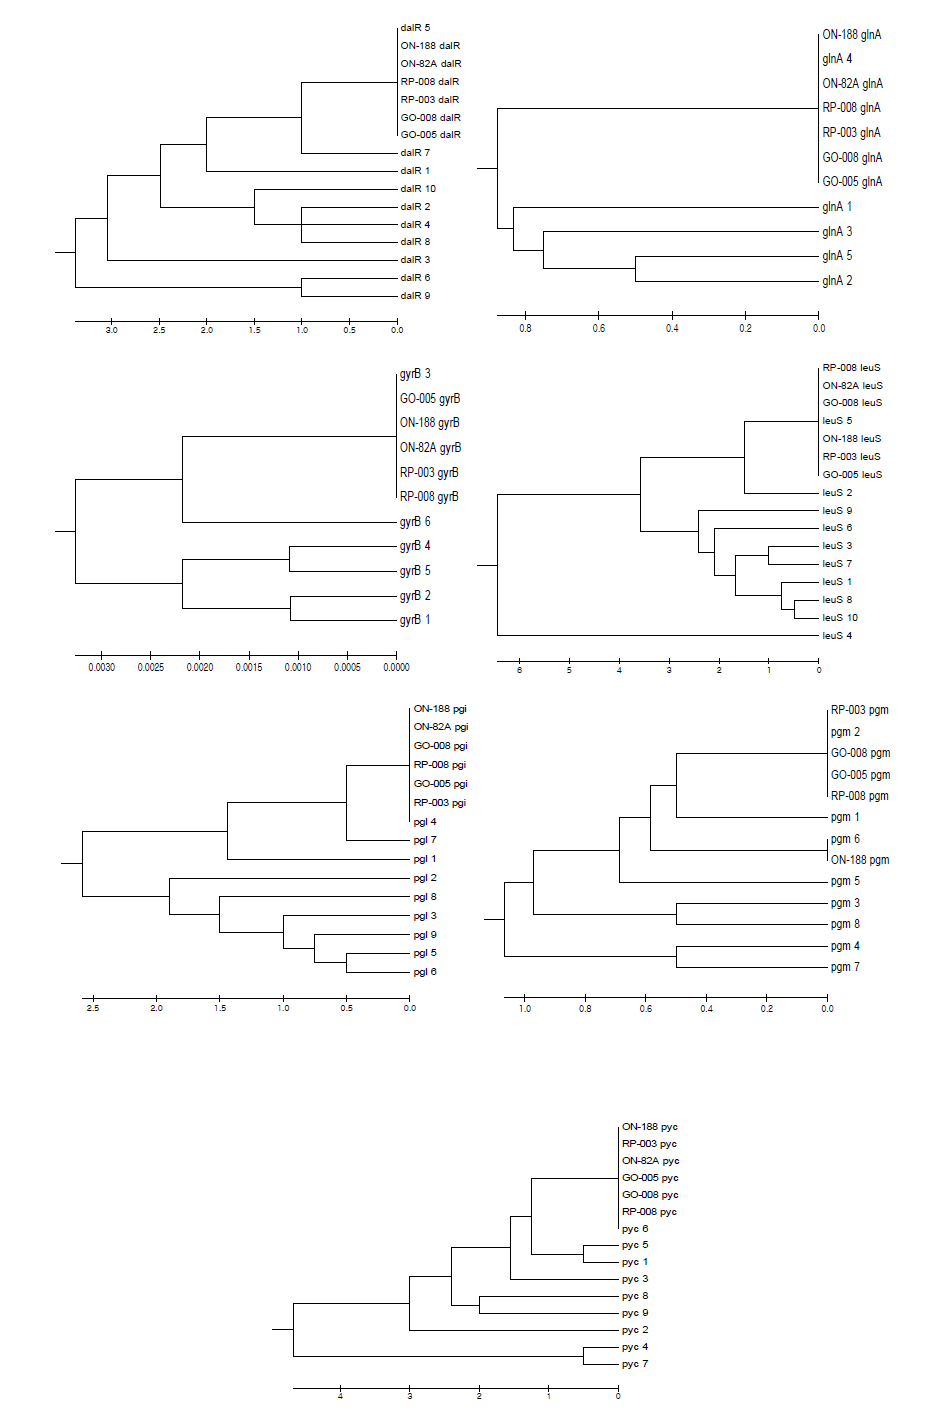 UPGMA dendrograms for 6 P . pentosaceus isolates sequenced for MLST.